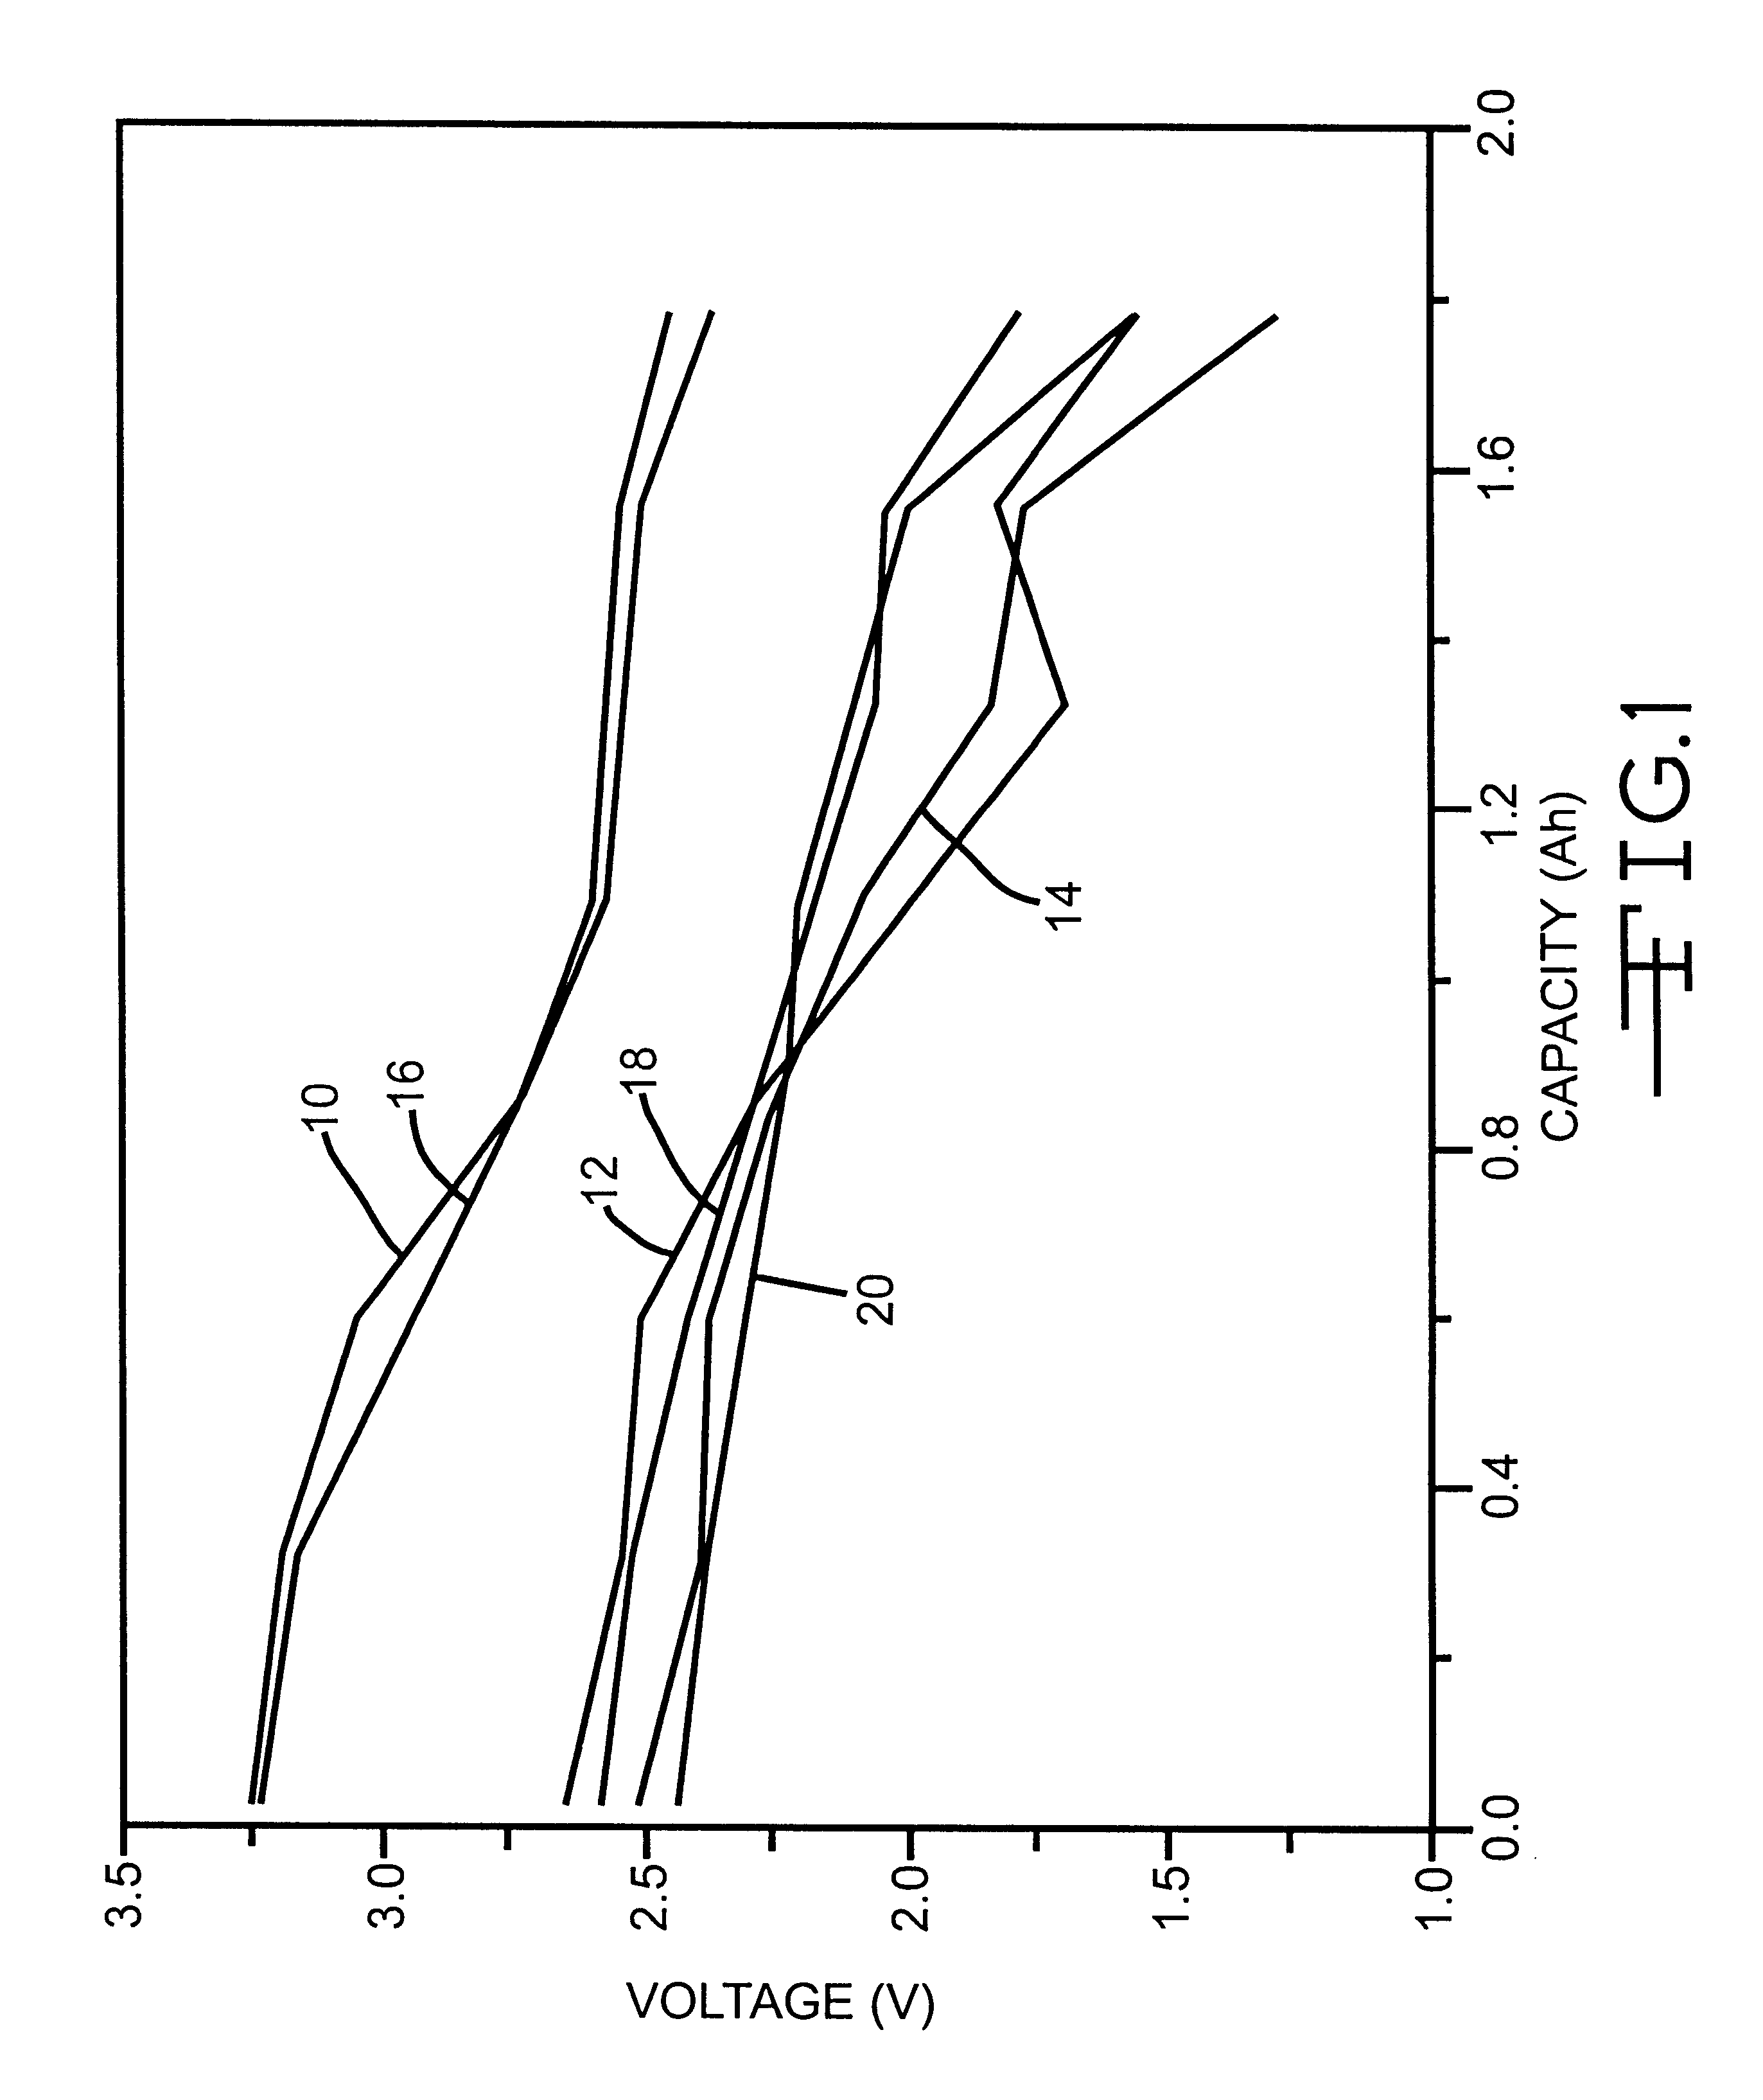 Alkali metal electrochemical cell having an improved cathode activated with a nonaqueous electrolyte having a carbonate additive